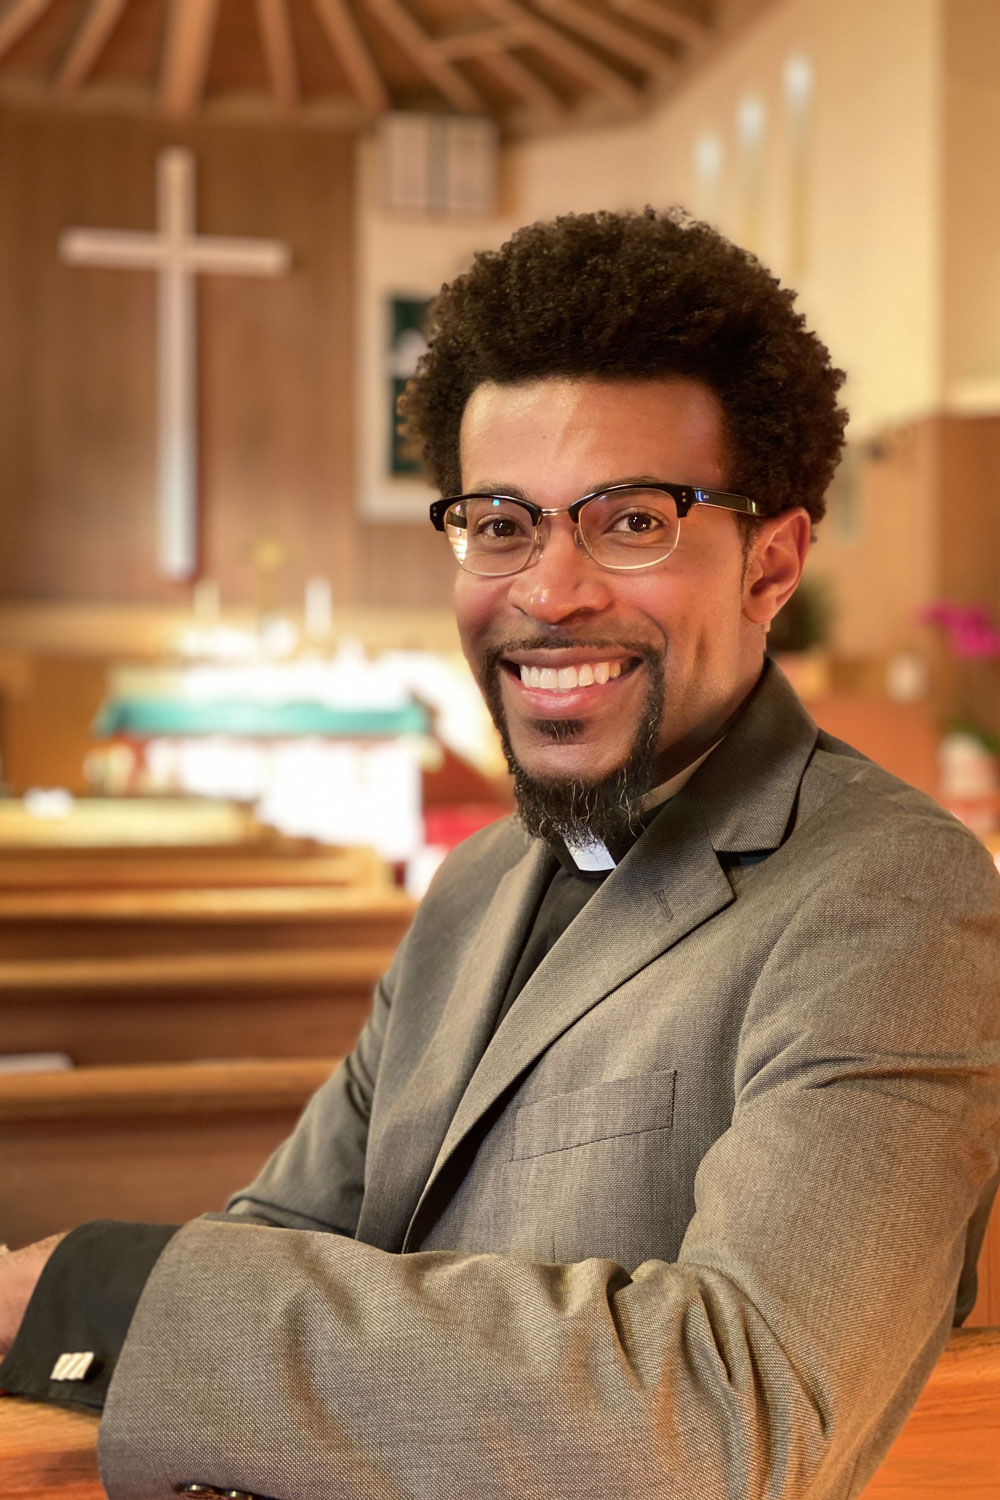 The Rev. Dr. Theon Johnson III is a participant in our August 12, 2020, Dismantling Racism Town Hall.